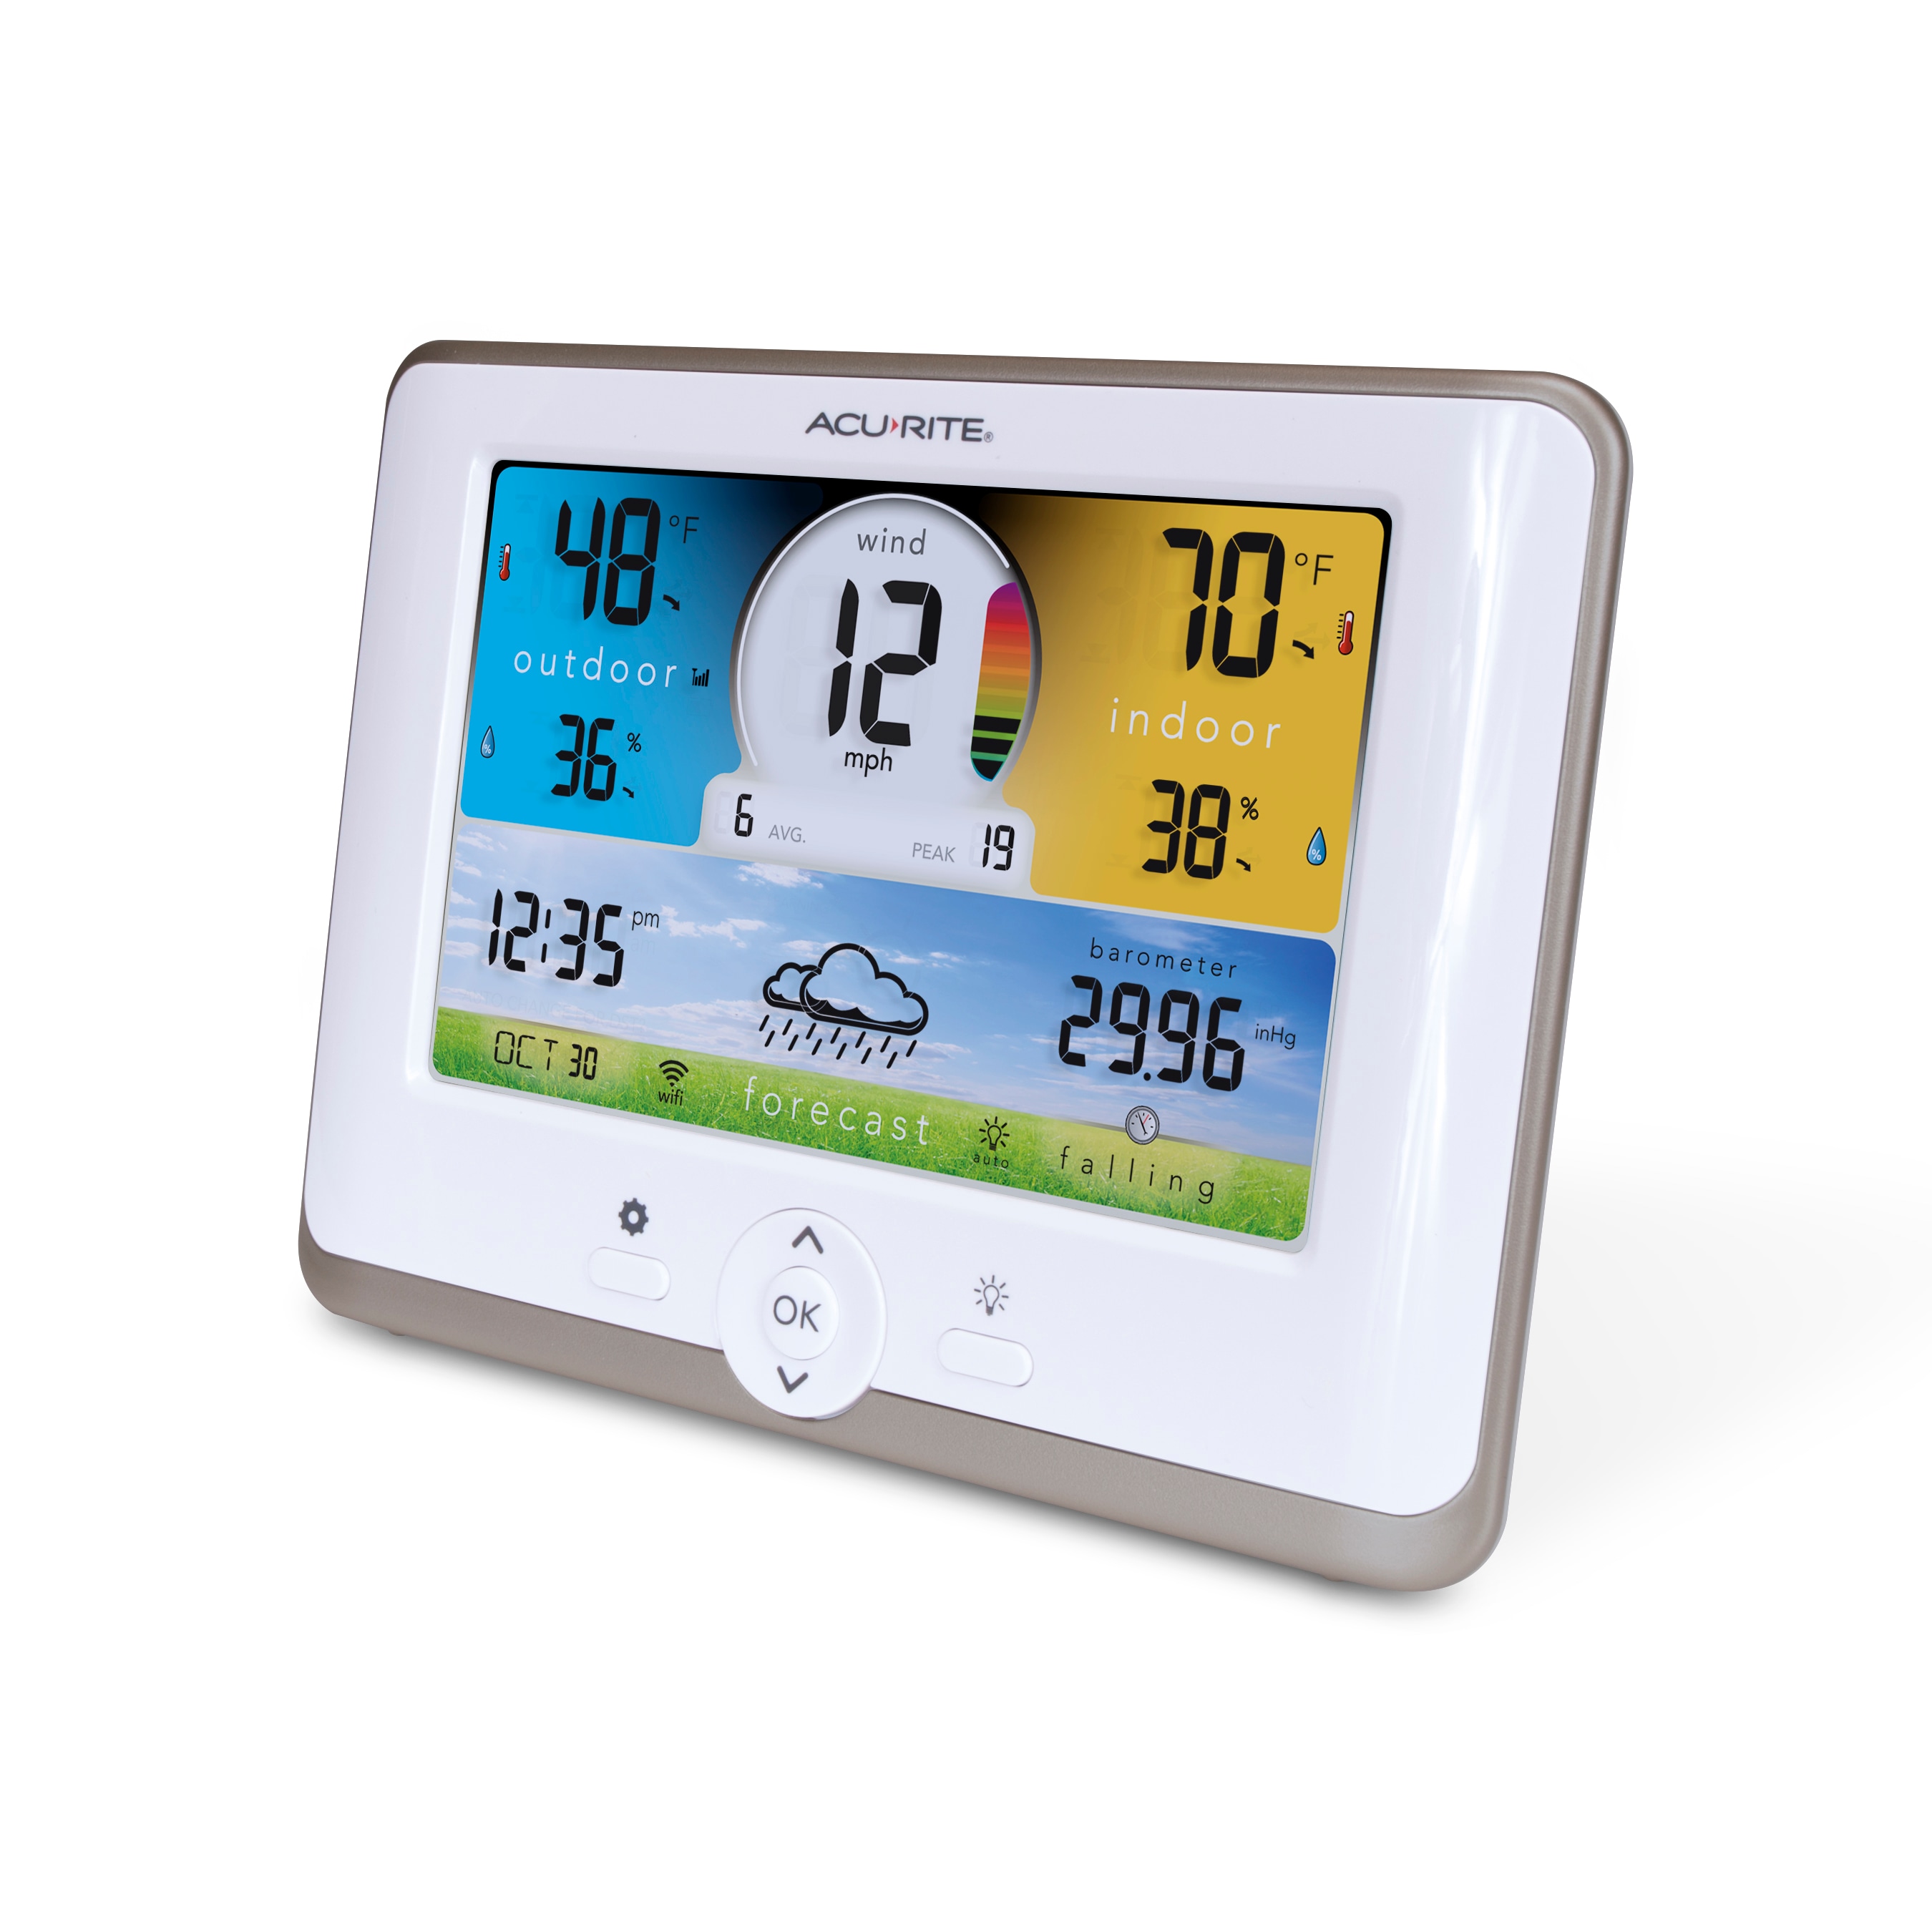 AcuRite "AcuRite Notos 3-in-1 Weather Station with Wind Temperature and Humidity" 